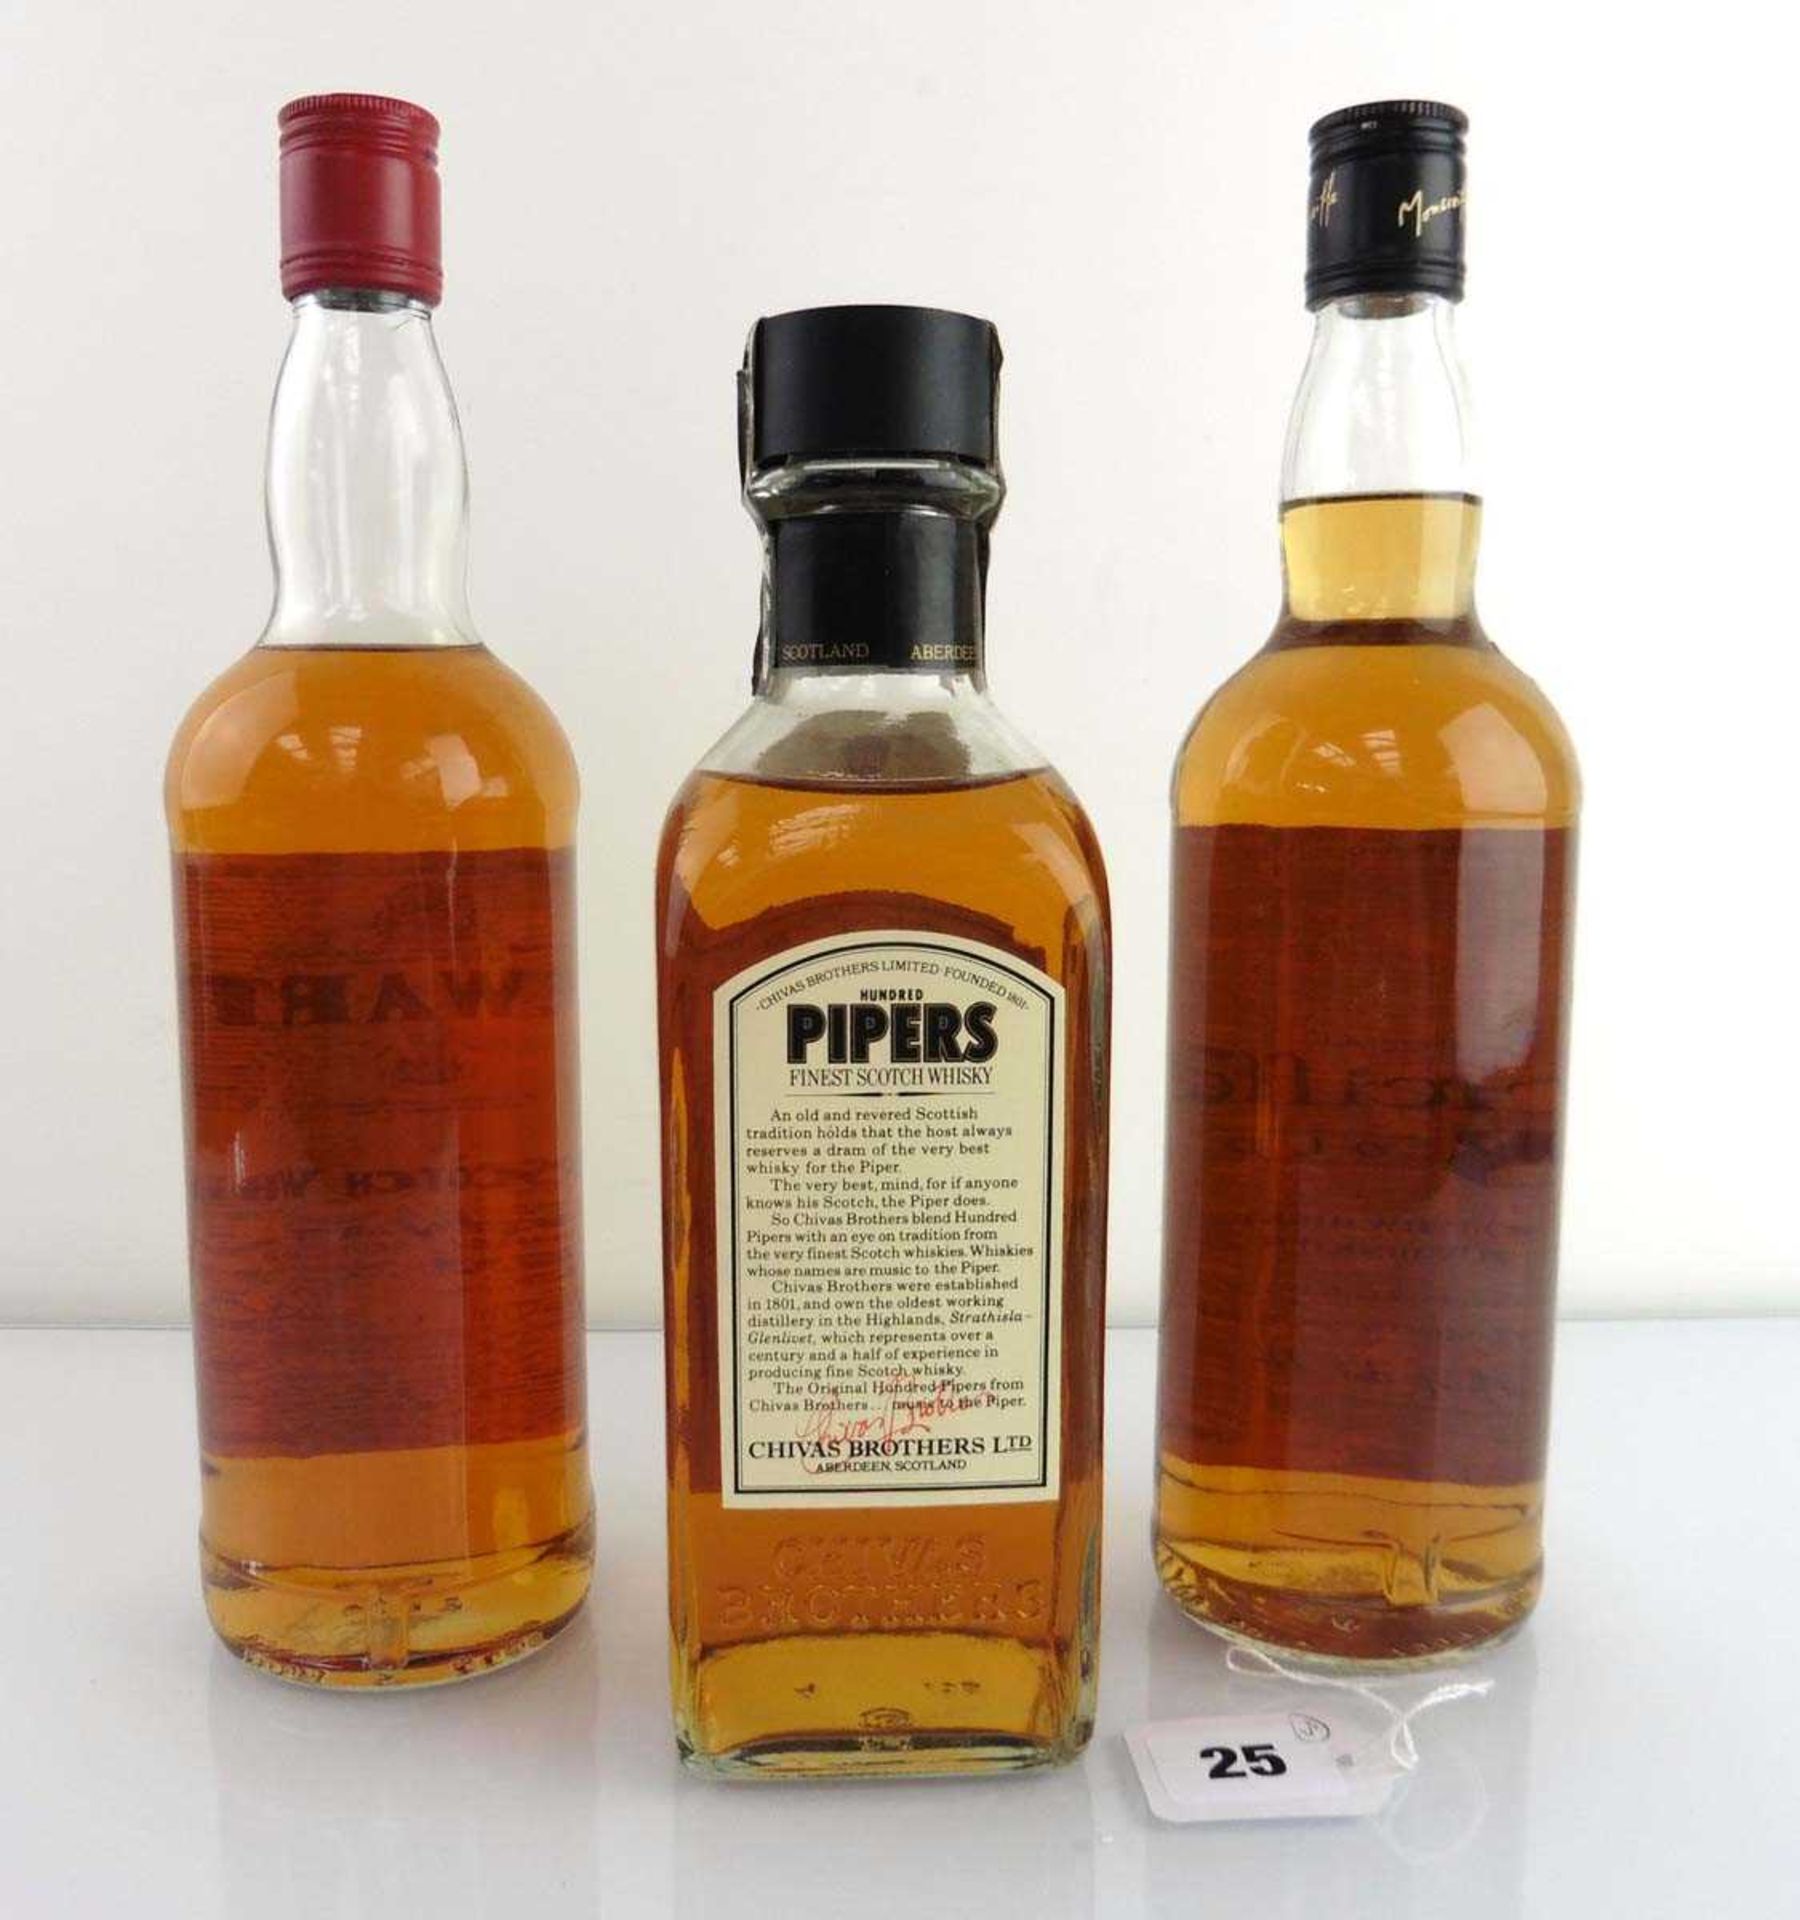 3 old bottles, 1x The Original Hundred Pipers Finest Scotch Whisky by Chivas Brother Circa 1970's - Image 2 of 2